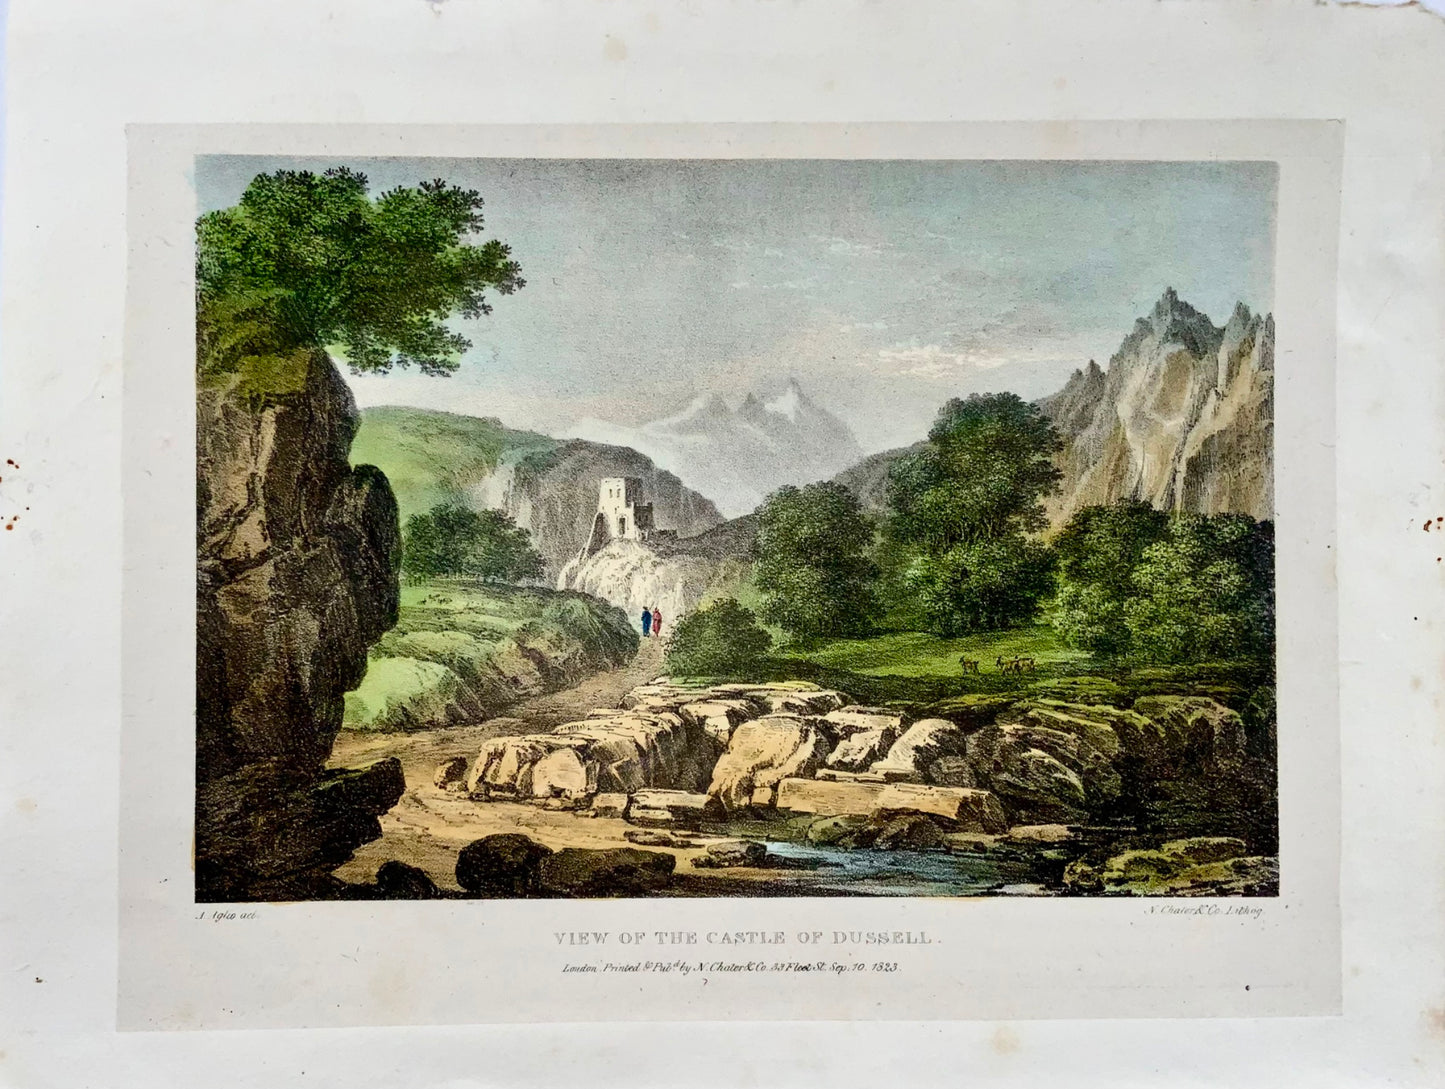 1823 View of the Castle of Dussell, Germany, Agostino Aglio, lithograph, landscape